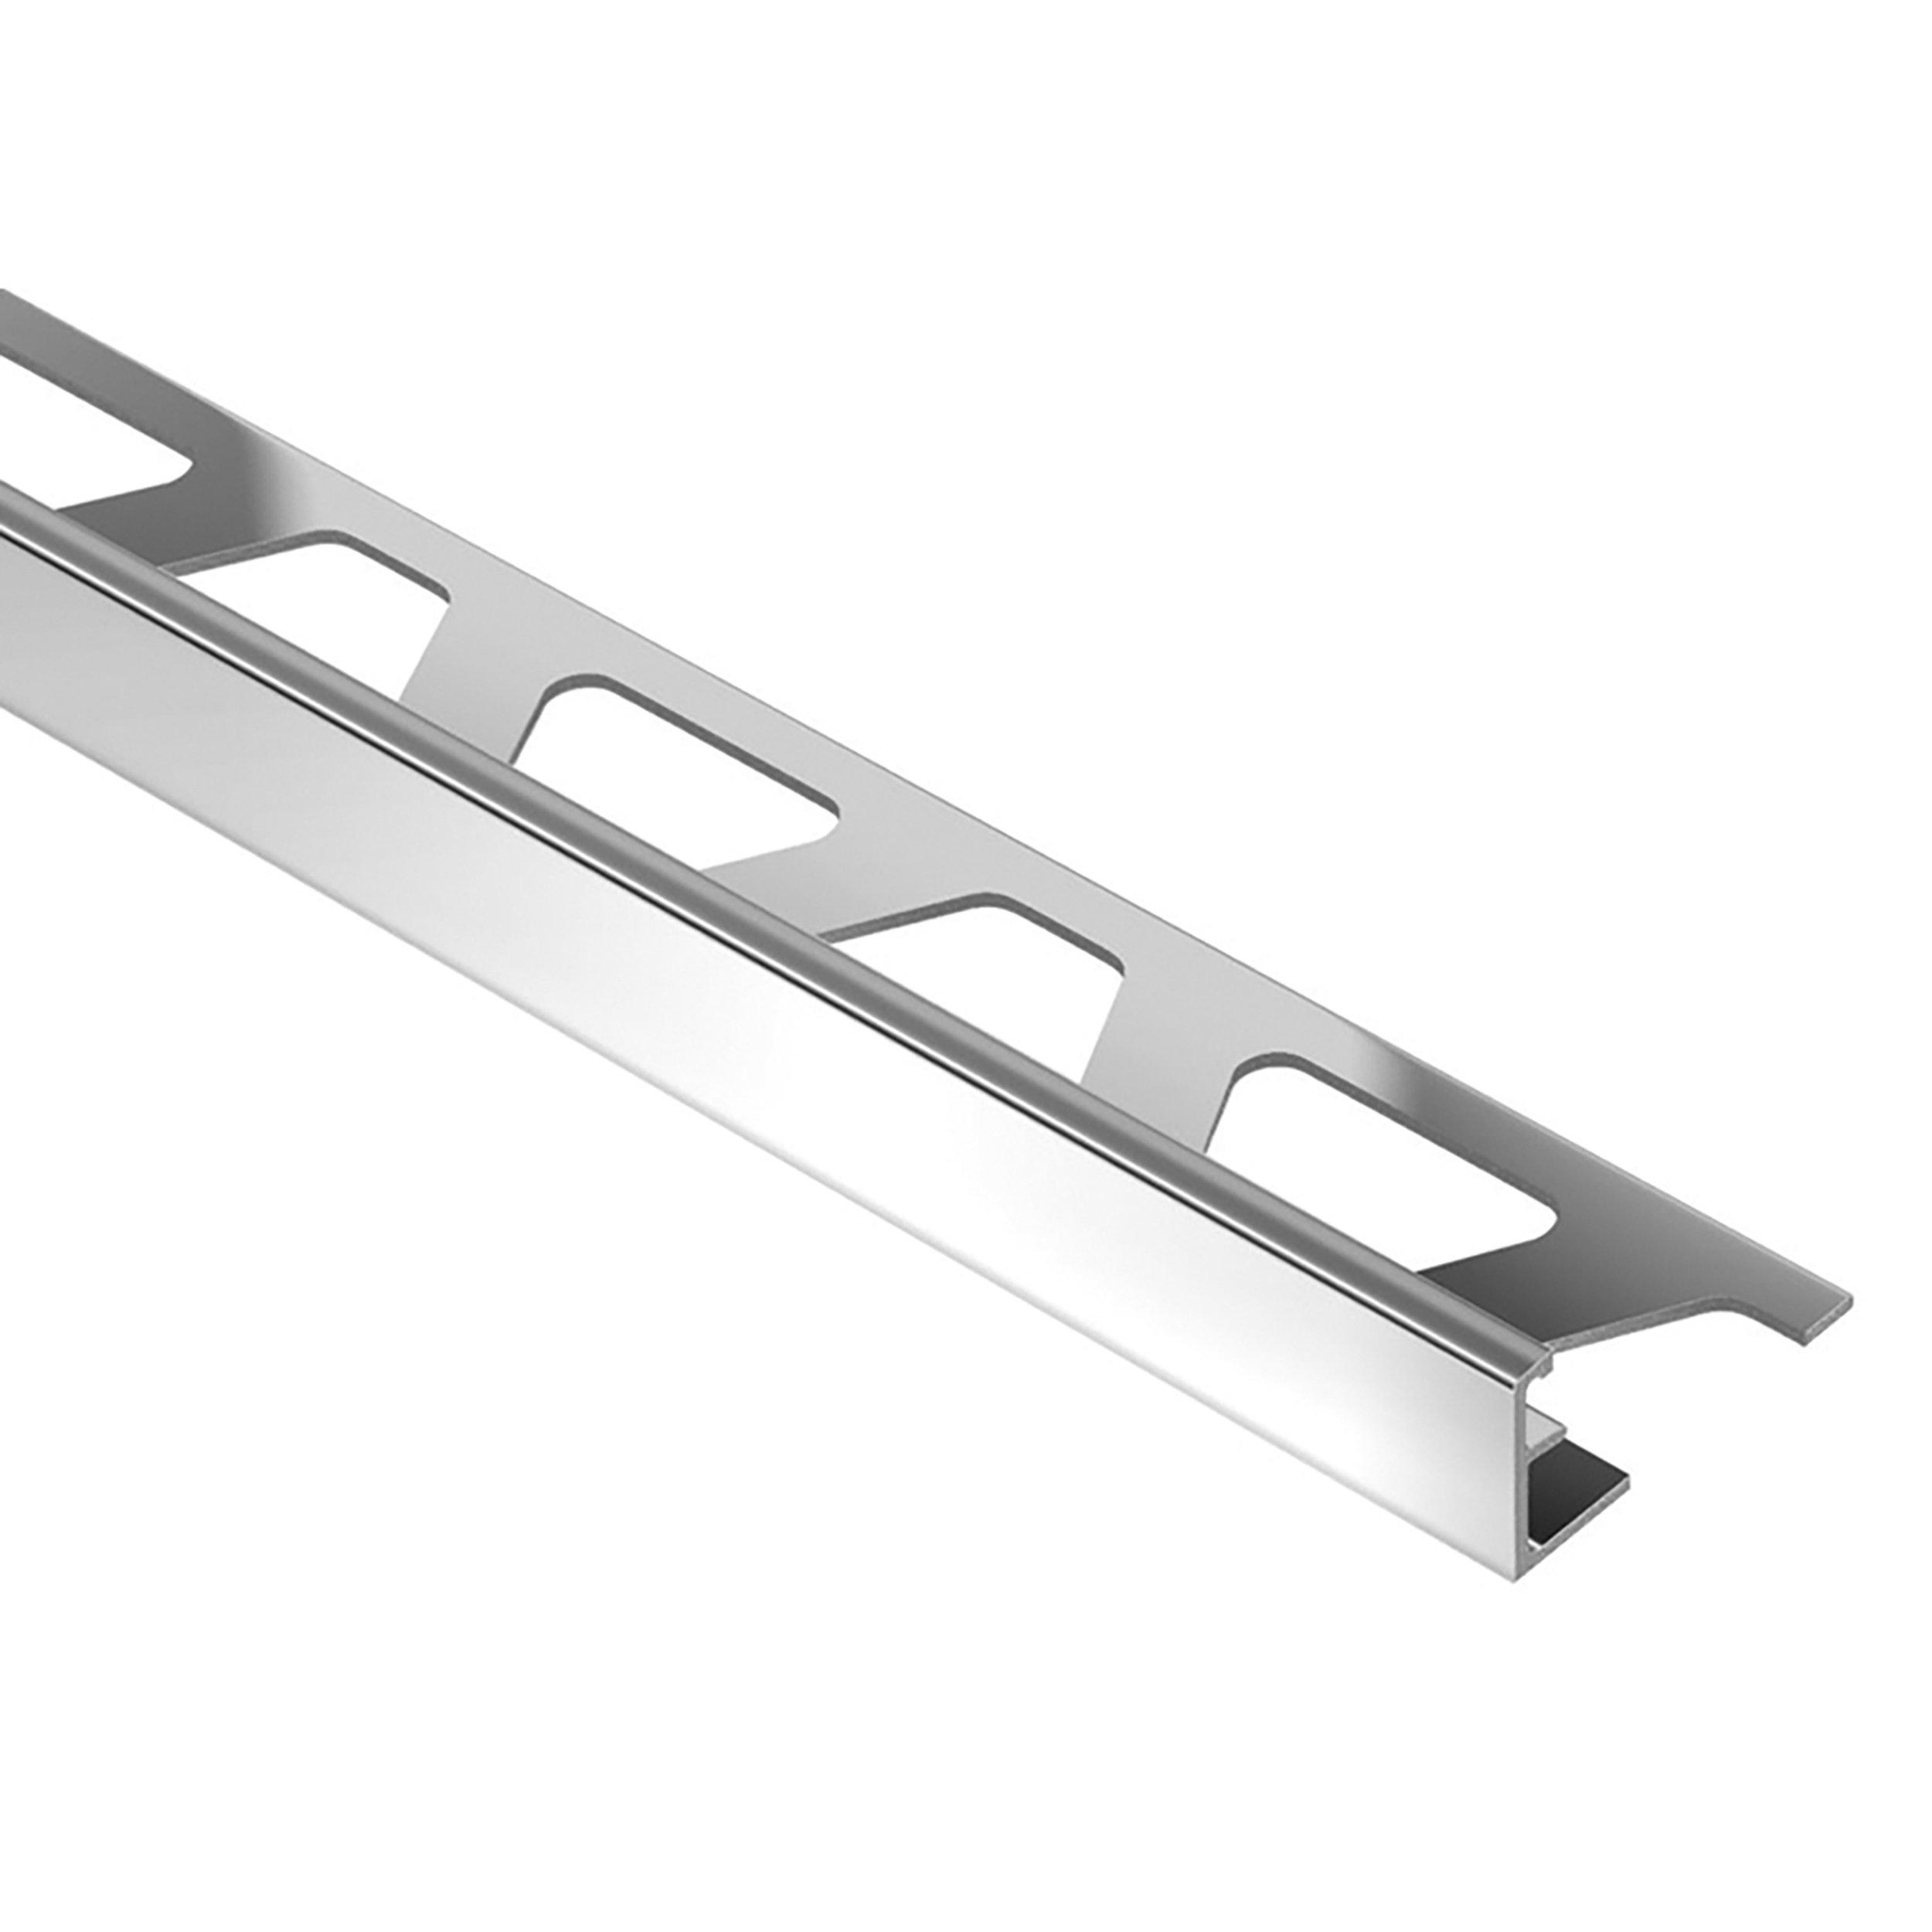 Schluter Jolly Edge Trim 3/8in. Aluminum Polished Chrome